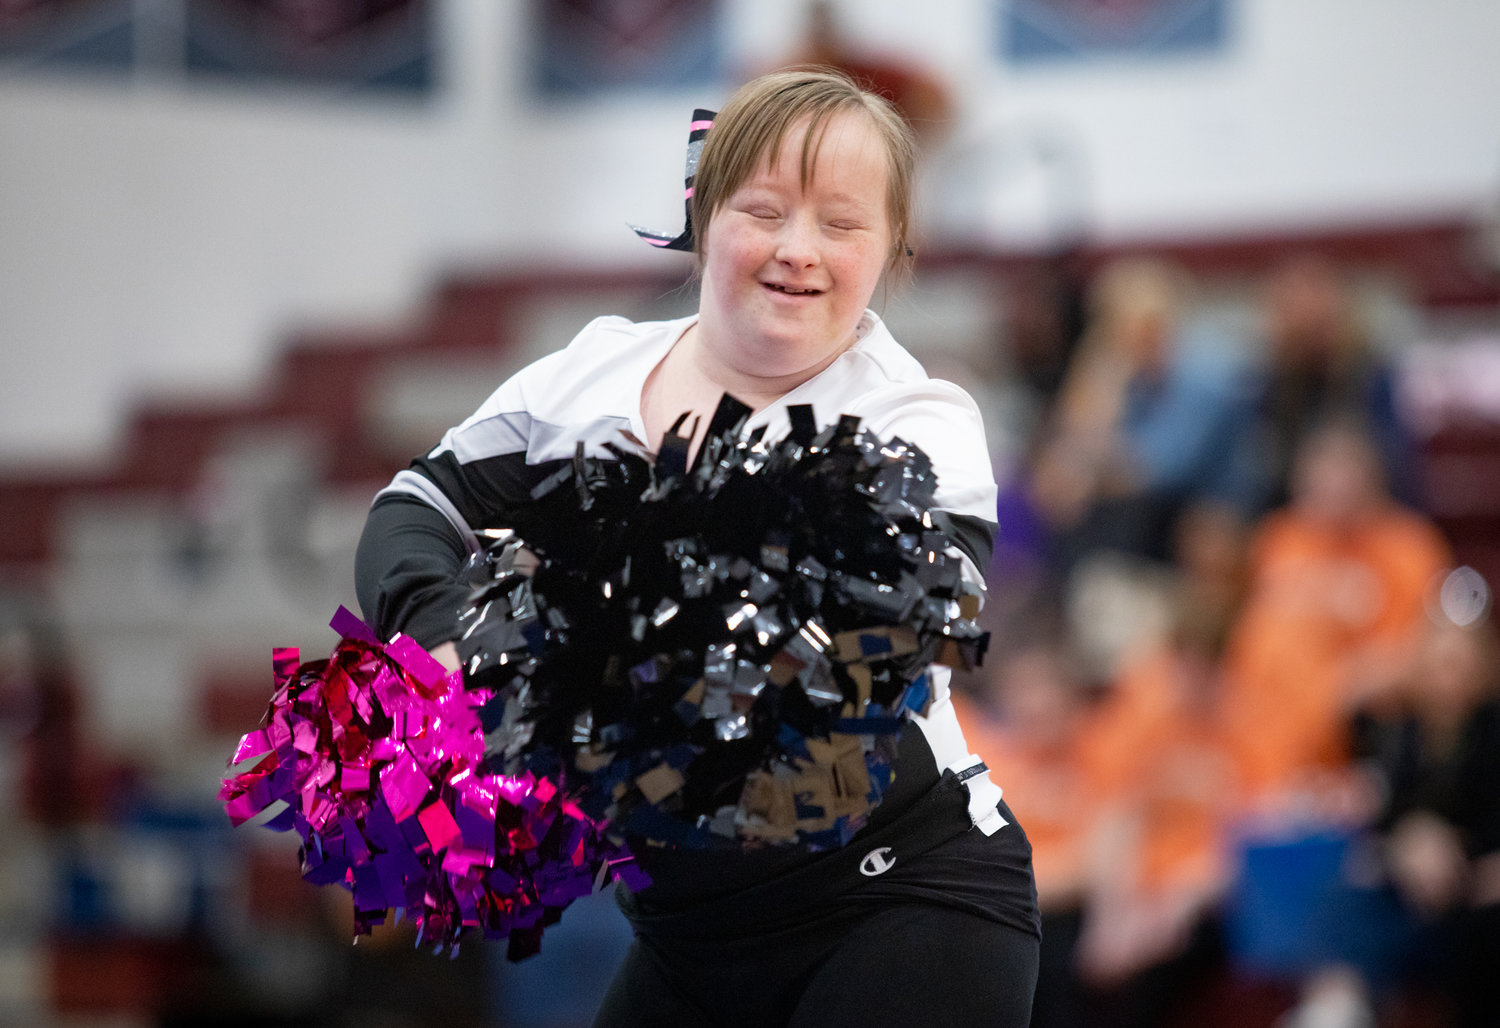 An athlete dances and shakes her pompoms for the crowd at the Special Olympics at Seaforth on Saturday.